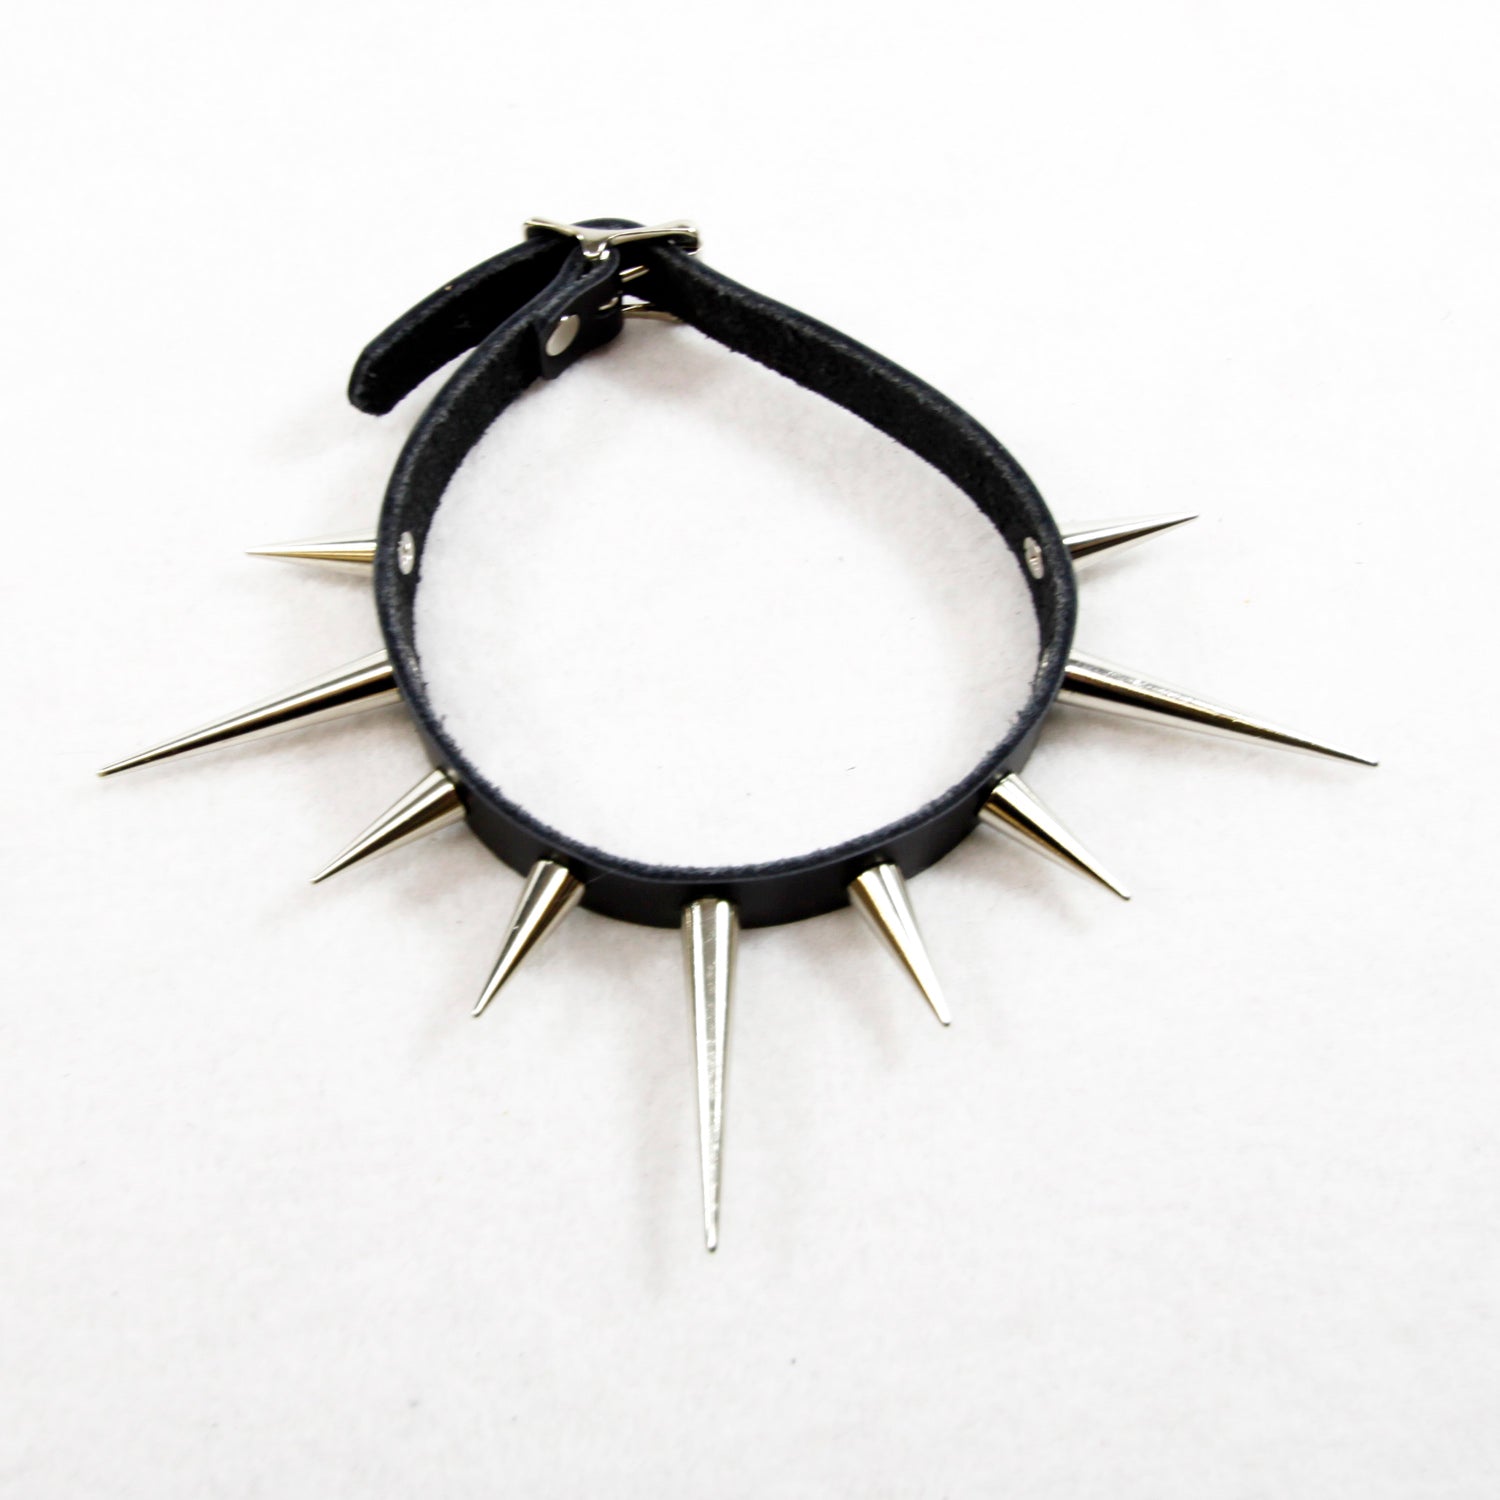 black and chrome Pawstar long theather spoke collar choker. Great for goth costume cosplay and more.